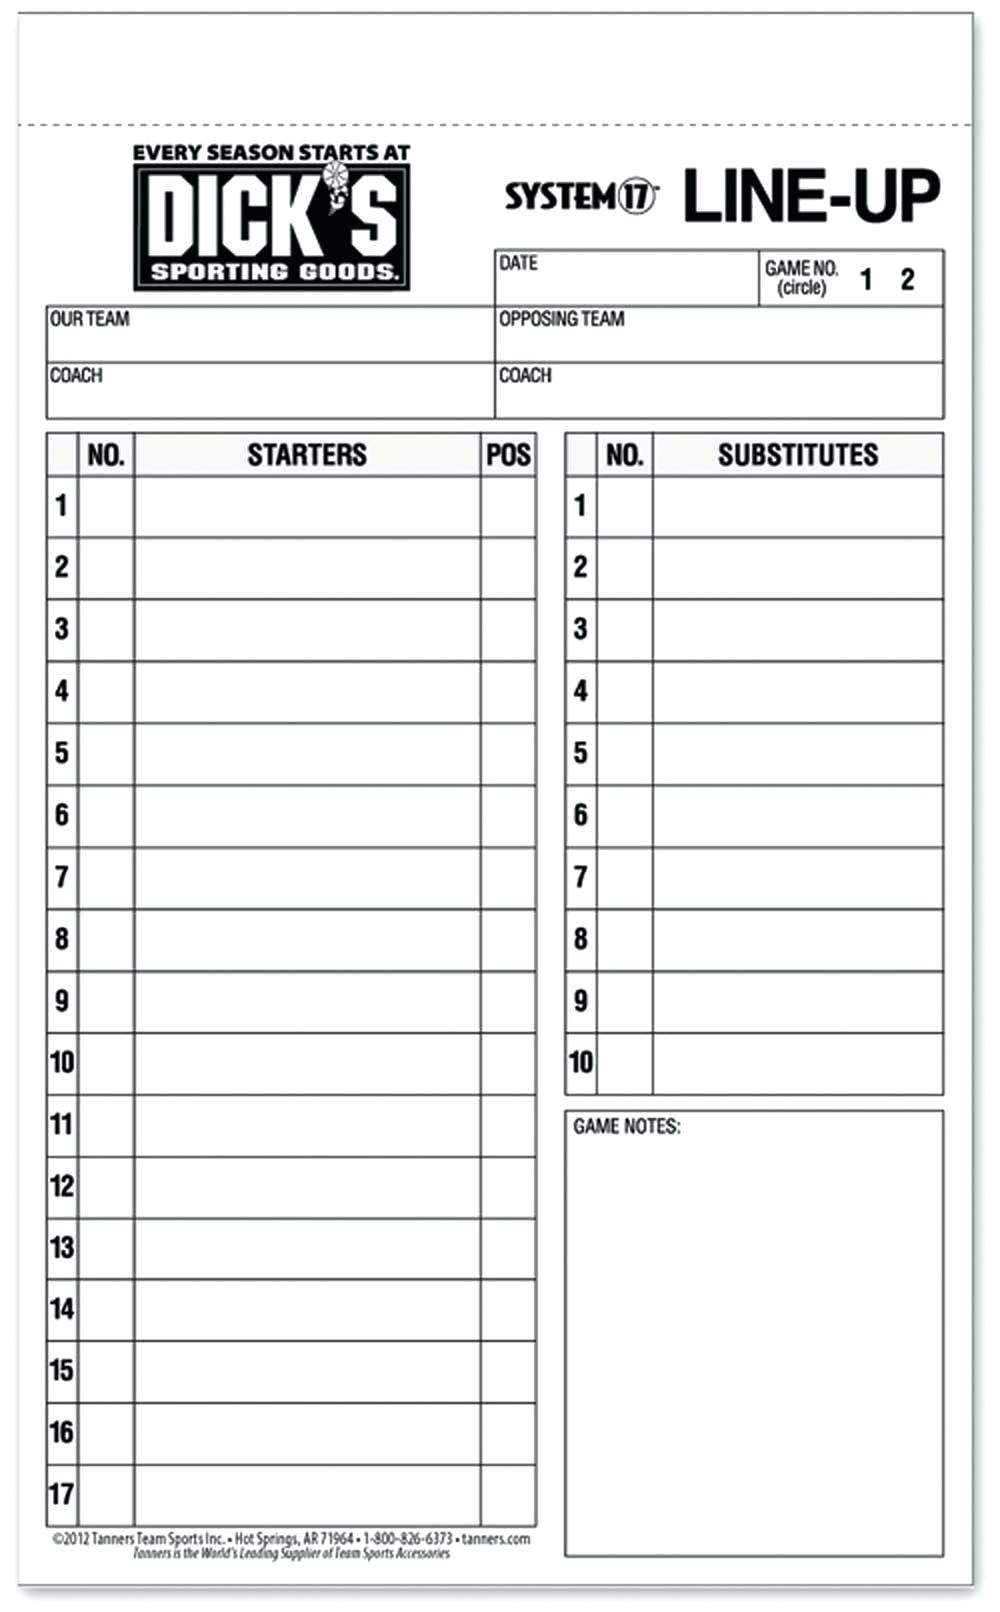 Baseball Card Inventory Spreadsheet Inside Epaperzone Page 41 ~ Example Of Spreadsheet Zone